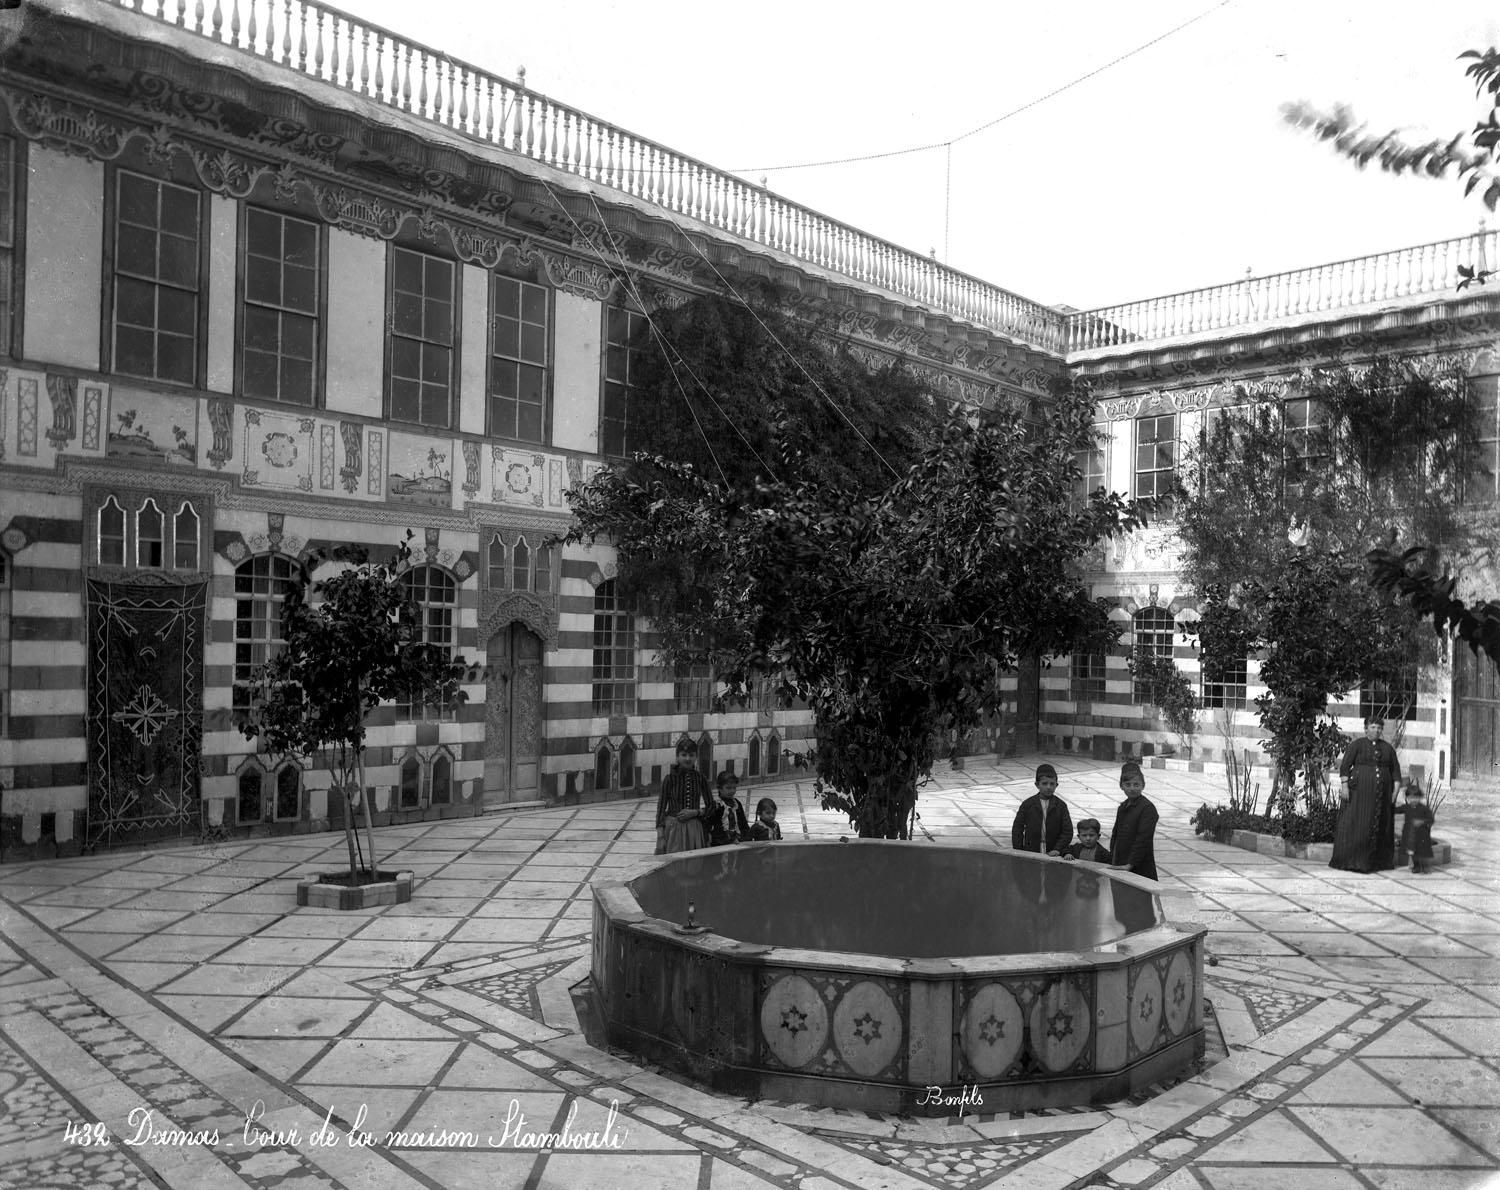 Bayt Istanbuli - Courtyard view of fountain